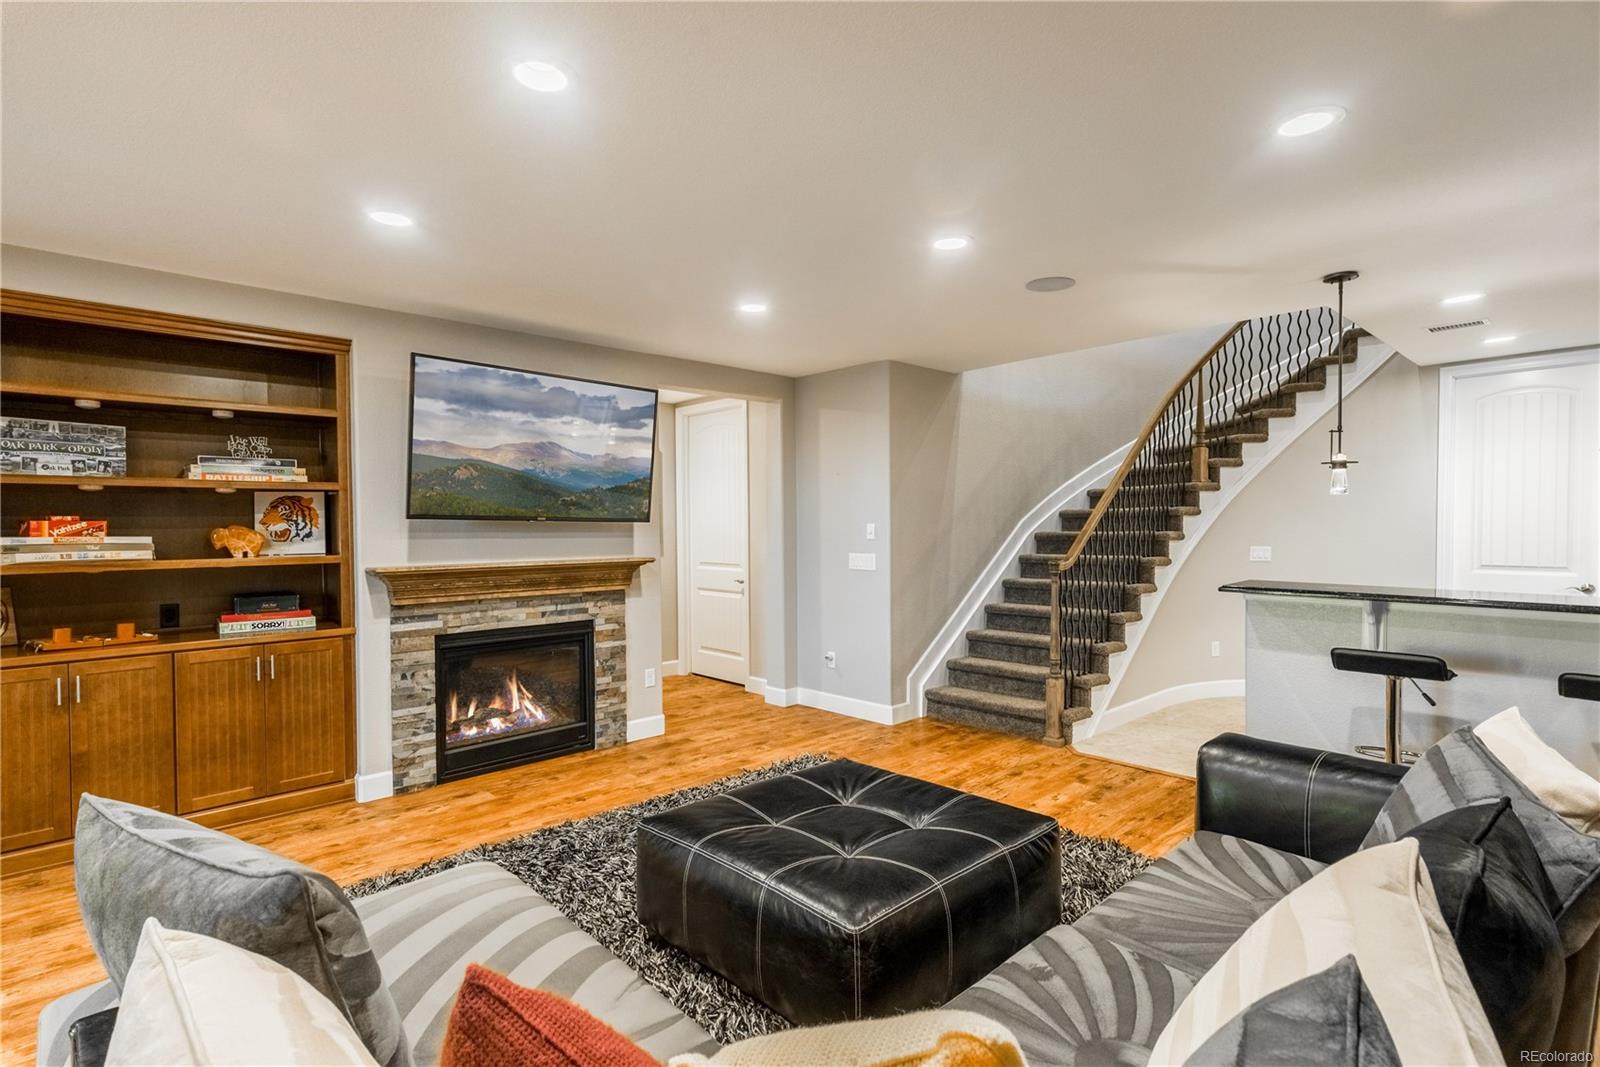 Lower level with extended wood flooring, fireplace and open bar area.